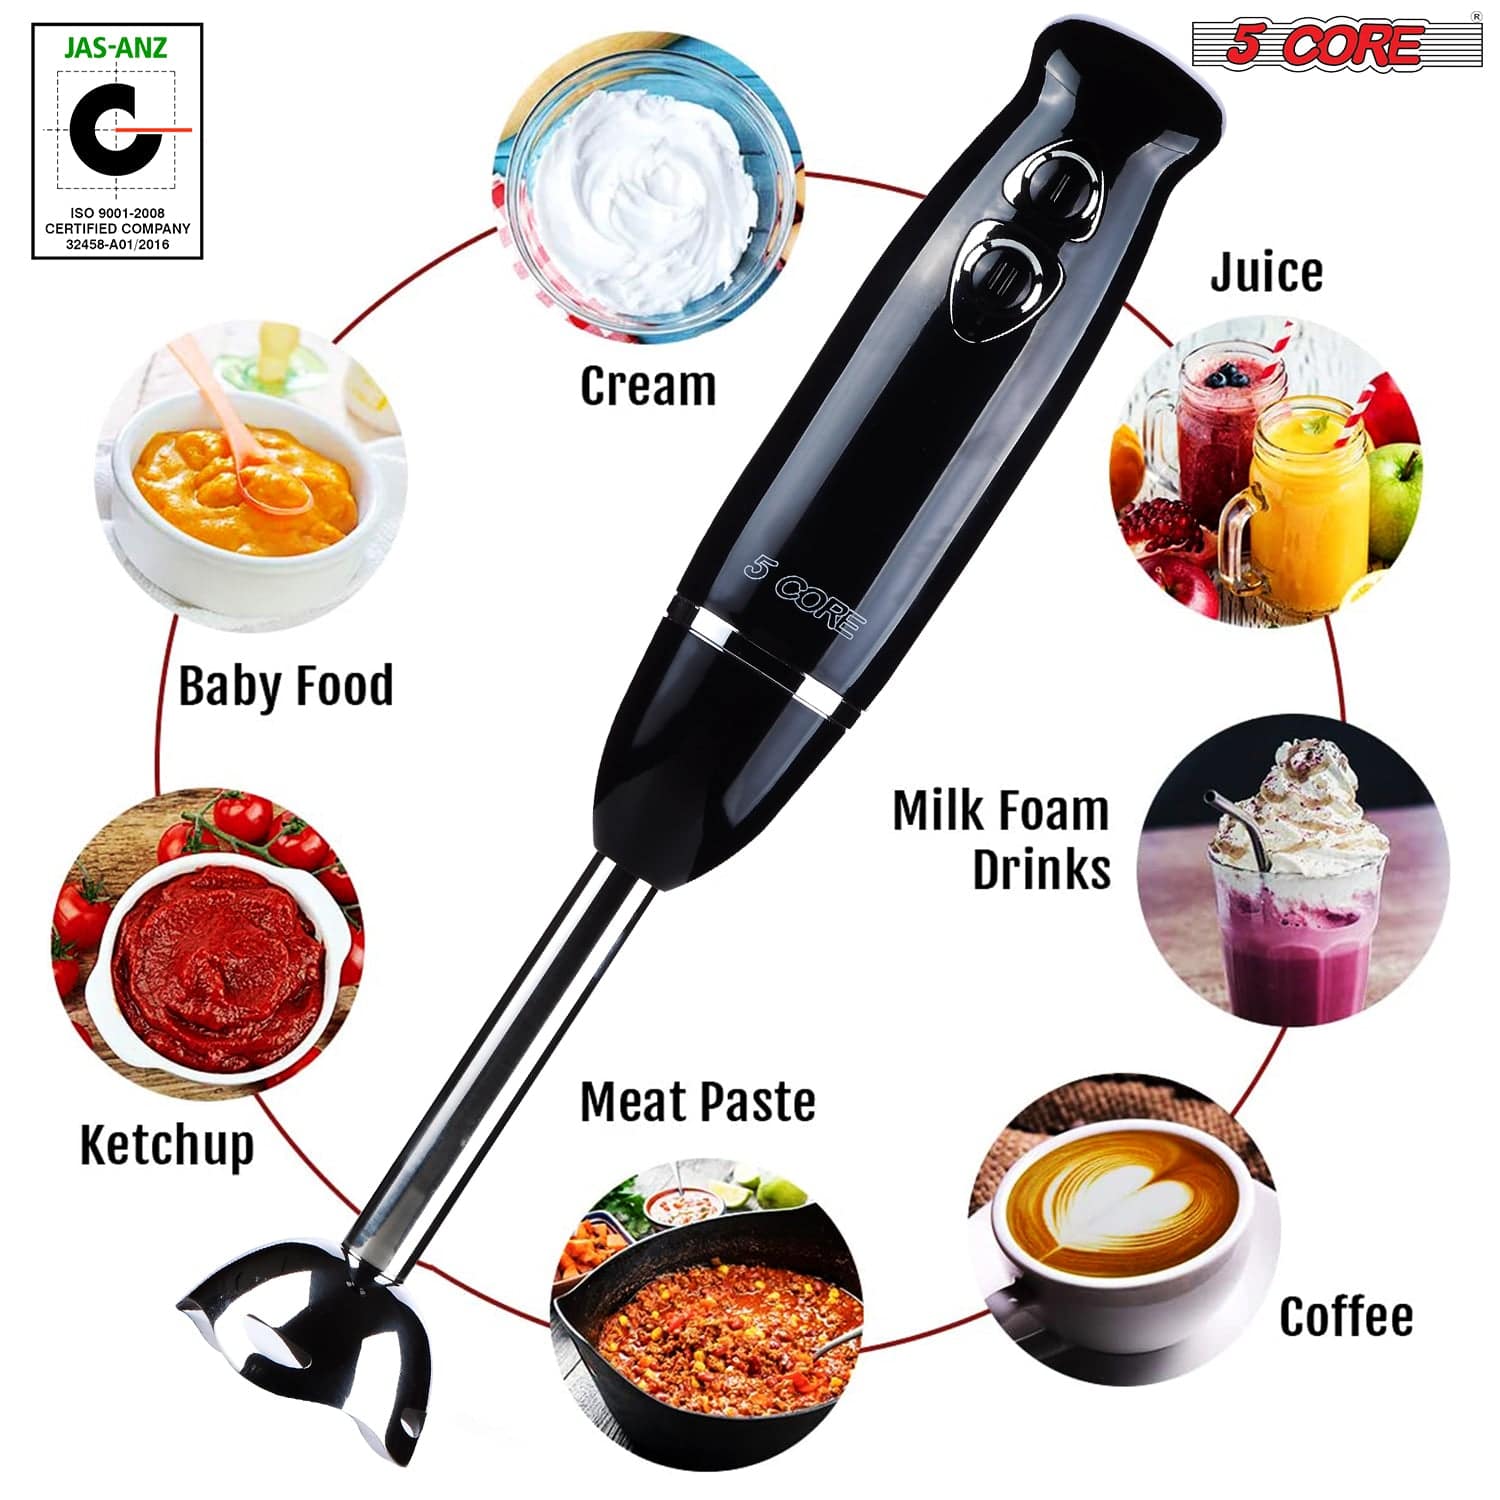 https://res.cloudinary.com/aeropost-inc/image/upload/IMX45W/5-core-kitchen-appliances-immersion-blender-handheld-electric-mixer-stainless-steel-with-titanium-blades-5-core-hb-1510-blk-37457431199981__1697878074.jpg